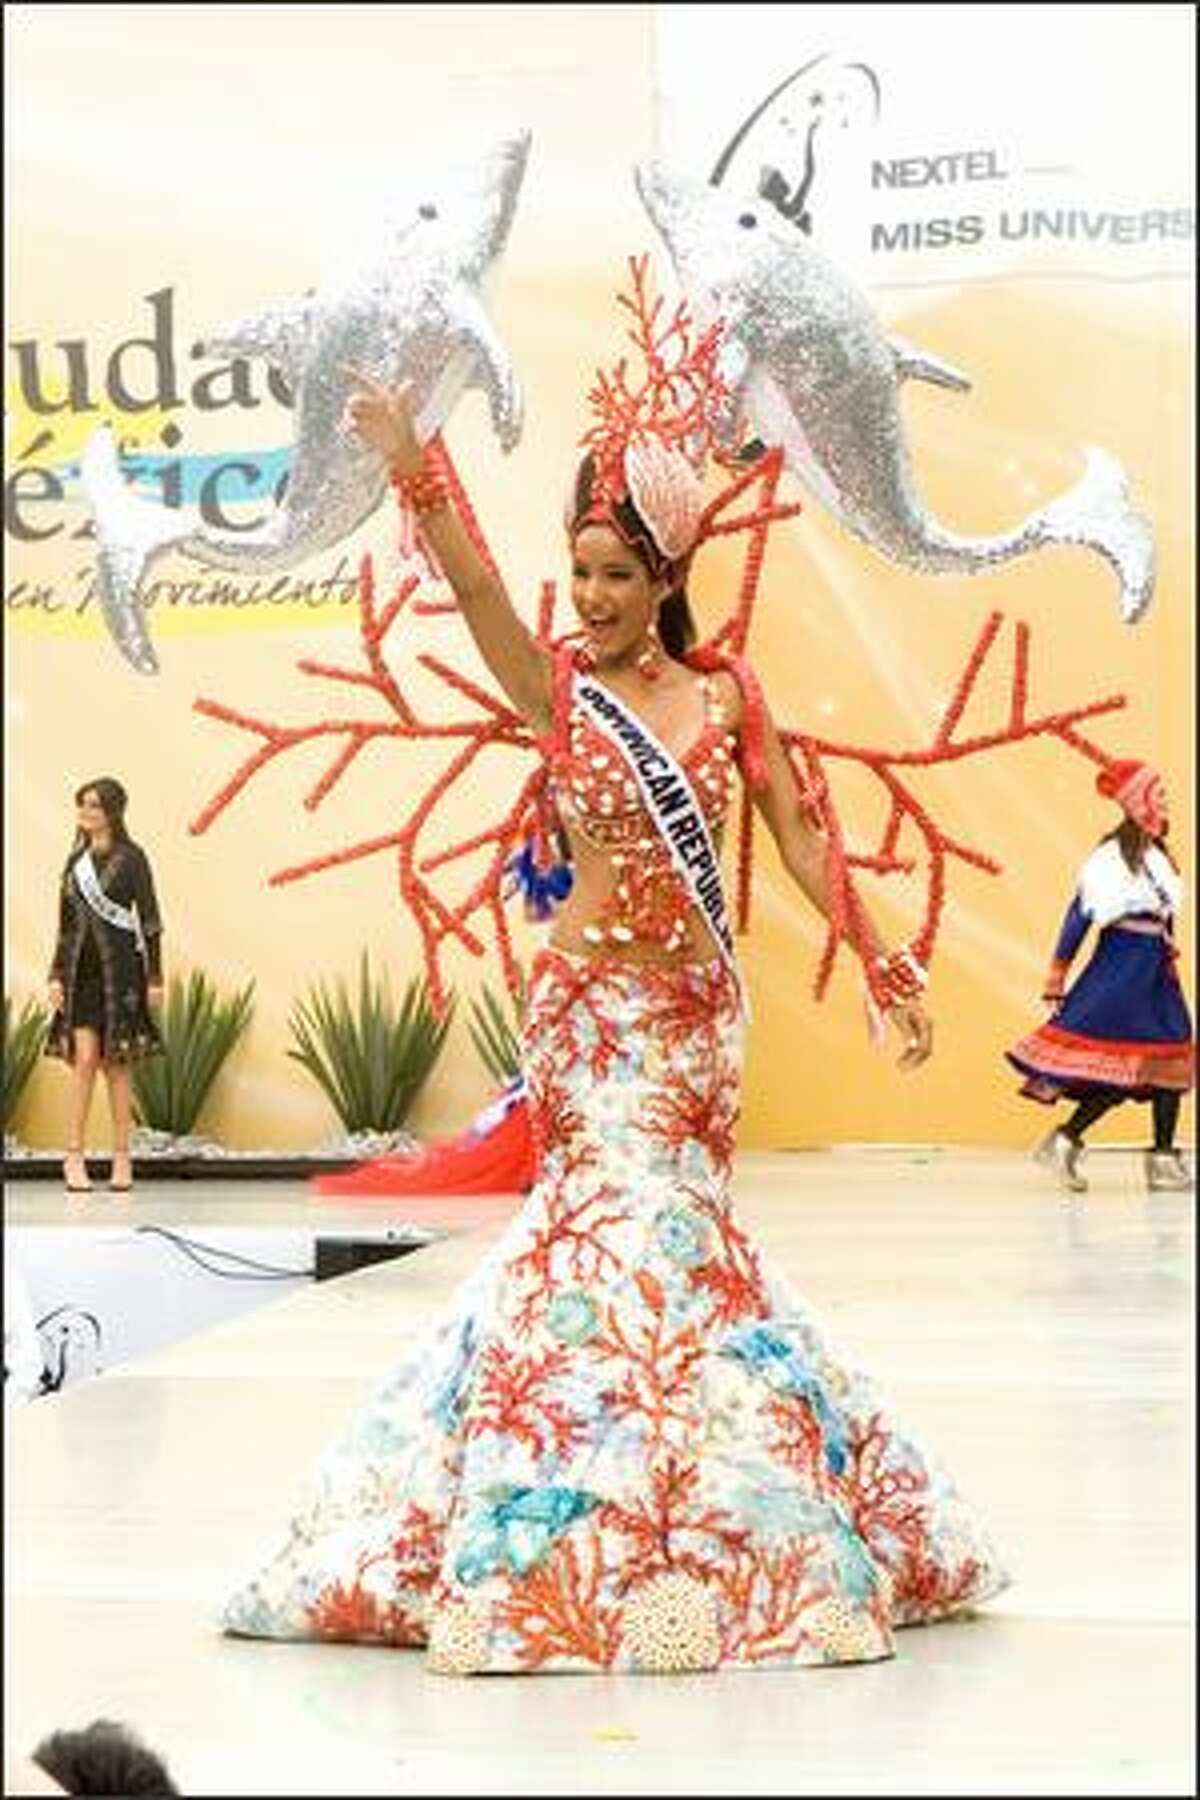 Massiel Taveras, Miss Dominican Republic 2007, participates in the 2007 Miss Universe National Costume Show at the Angel of Independence in Mexico City on May 20.